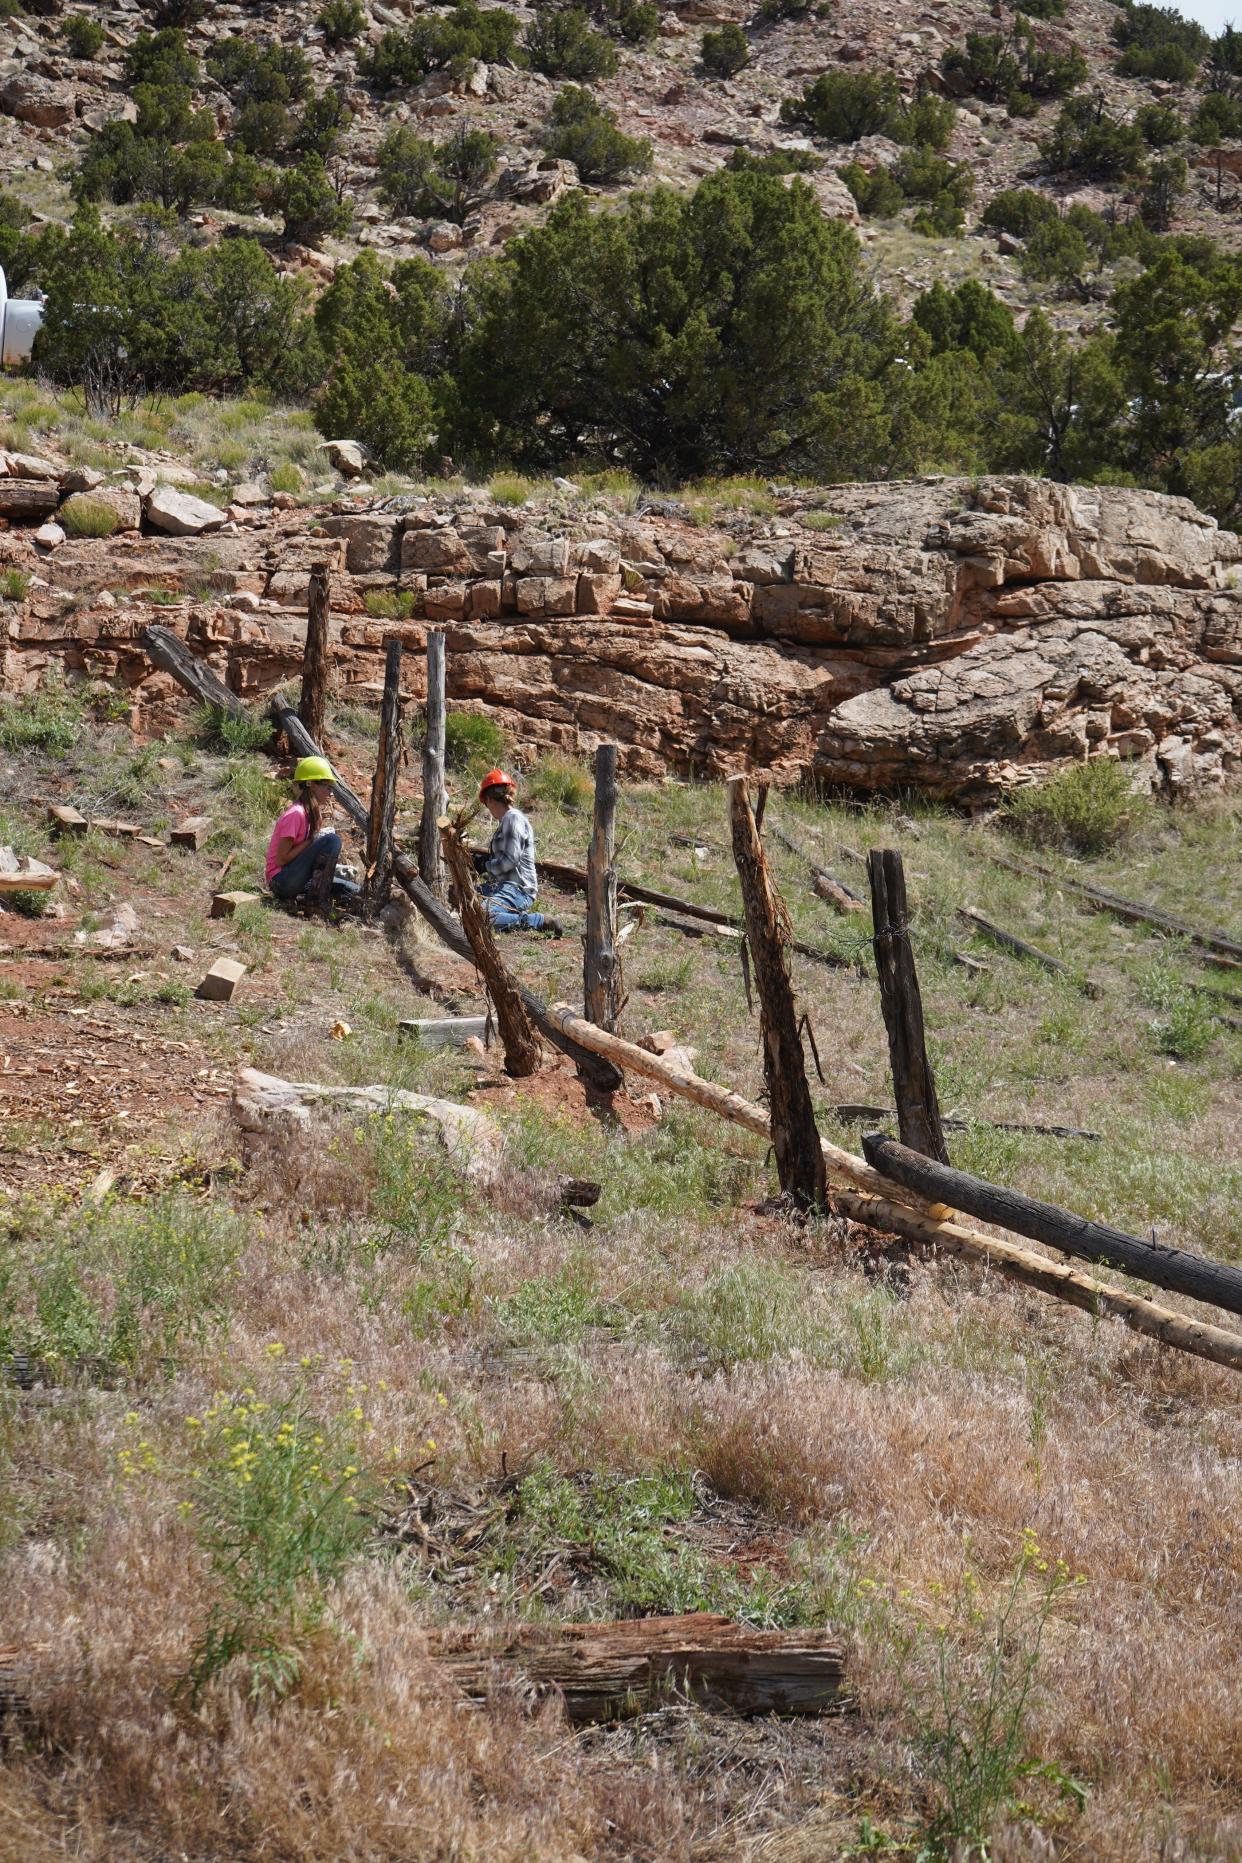 Youth Conservation Corps work on a fence at Bighorn Canyon National Recreation Area.